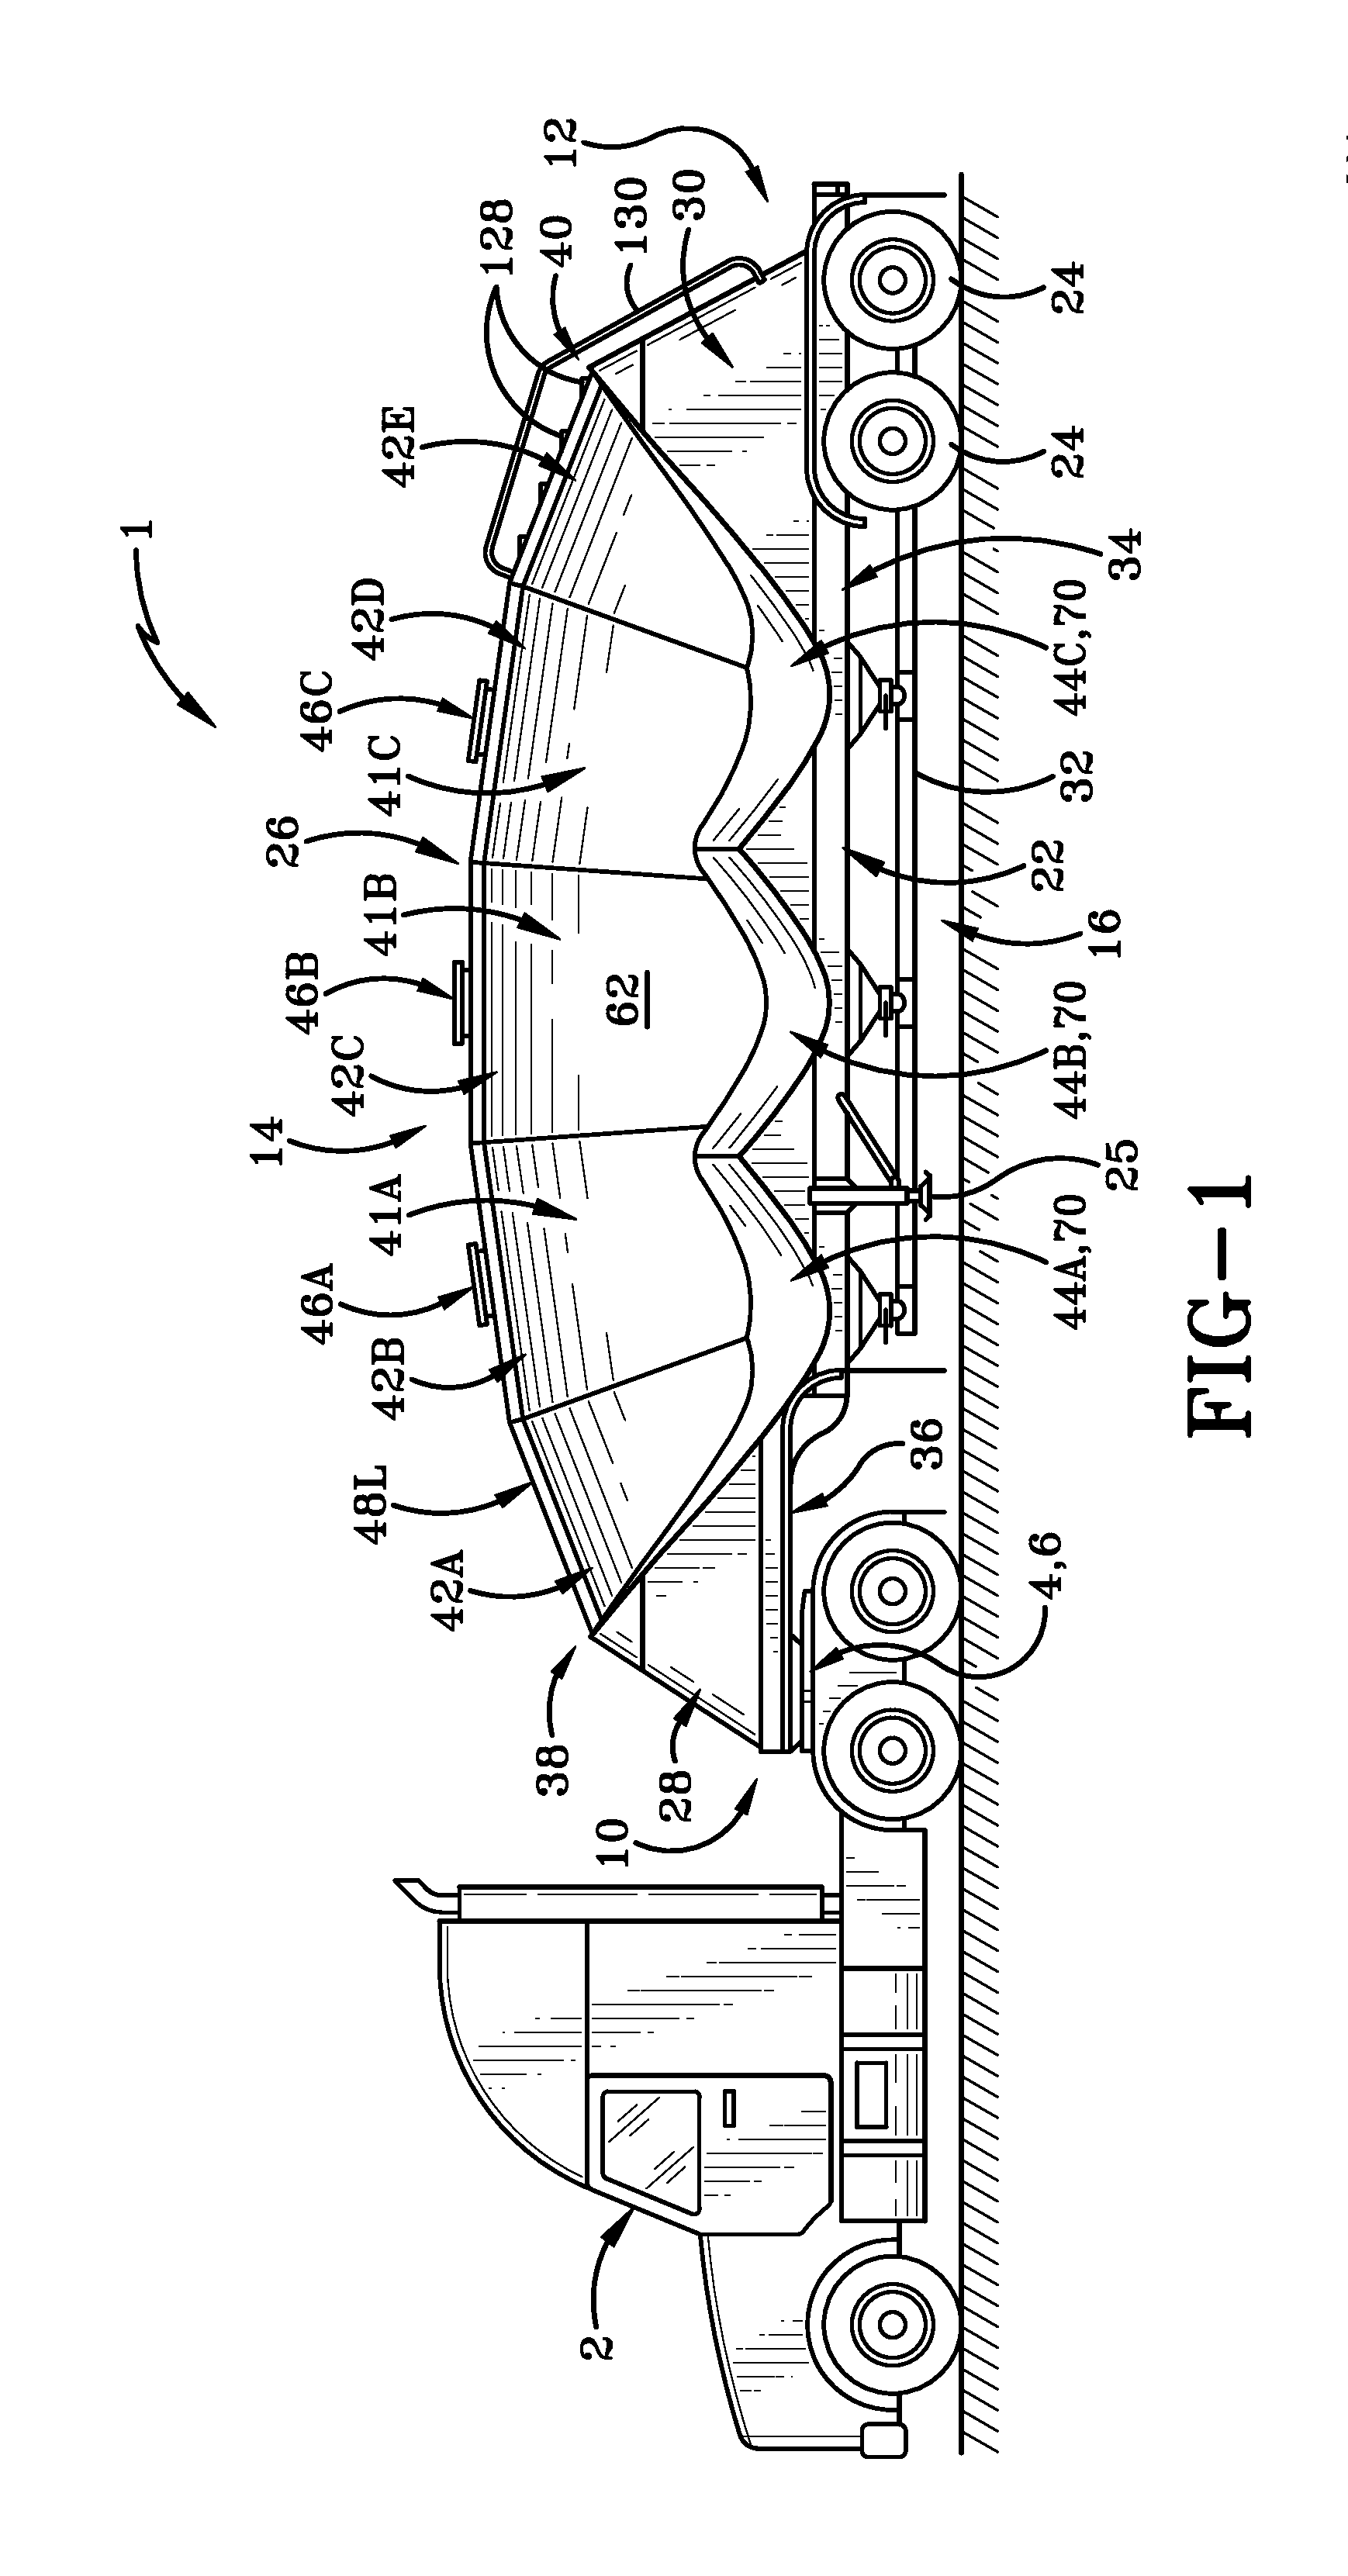 Trailer and method of manufacturing same